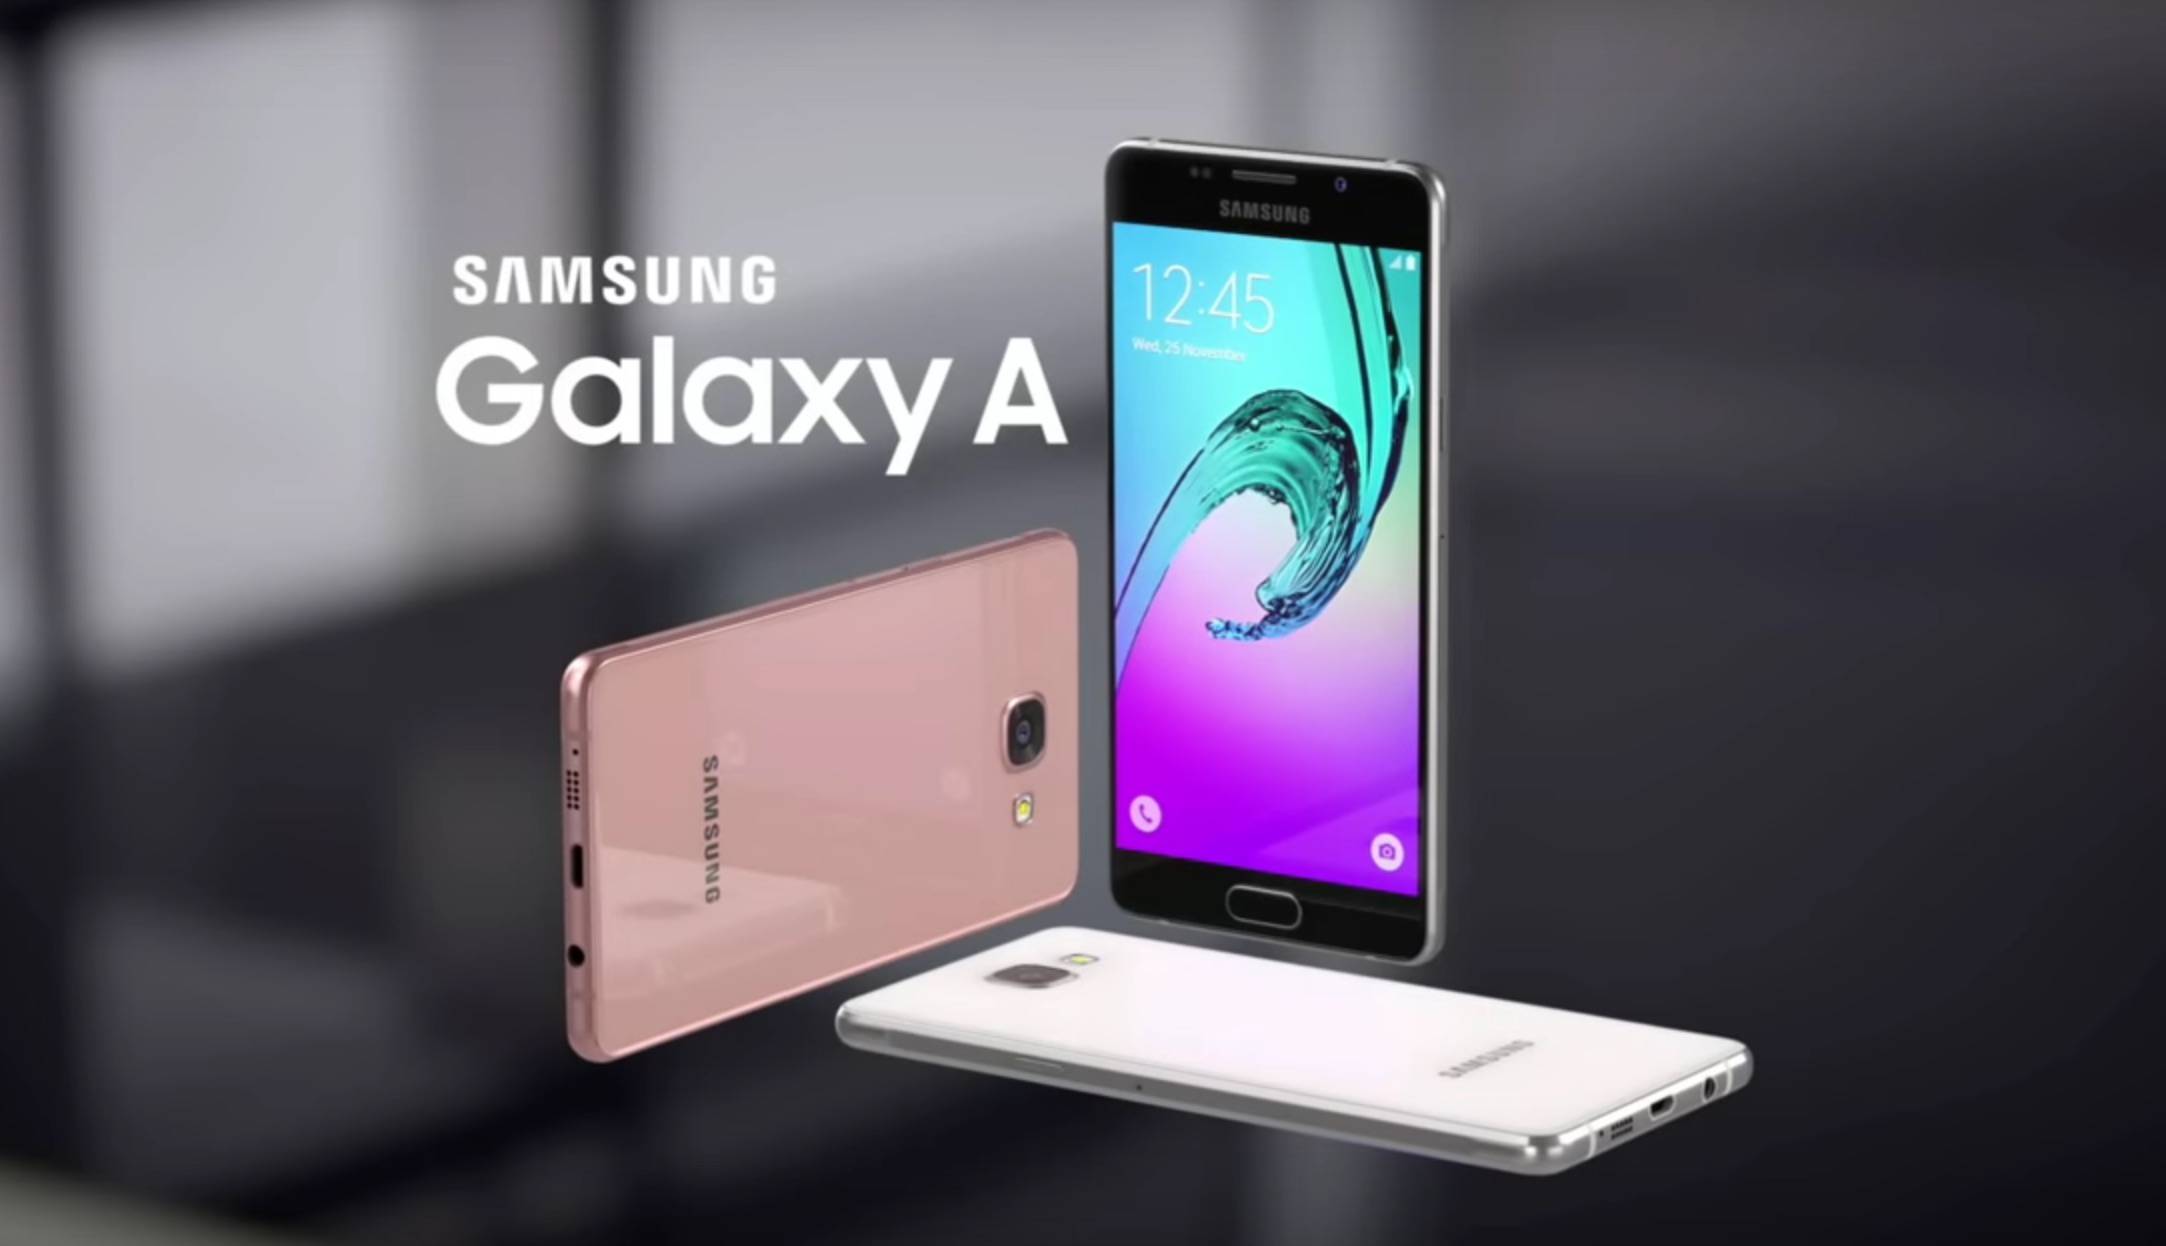 Samsung Galaxy A Series 2   020 camera specs surface online - Android